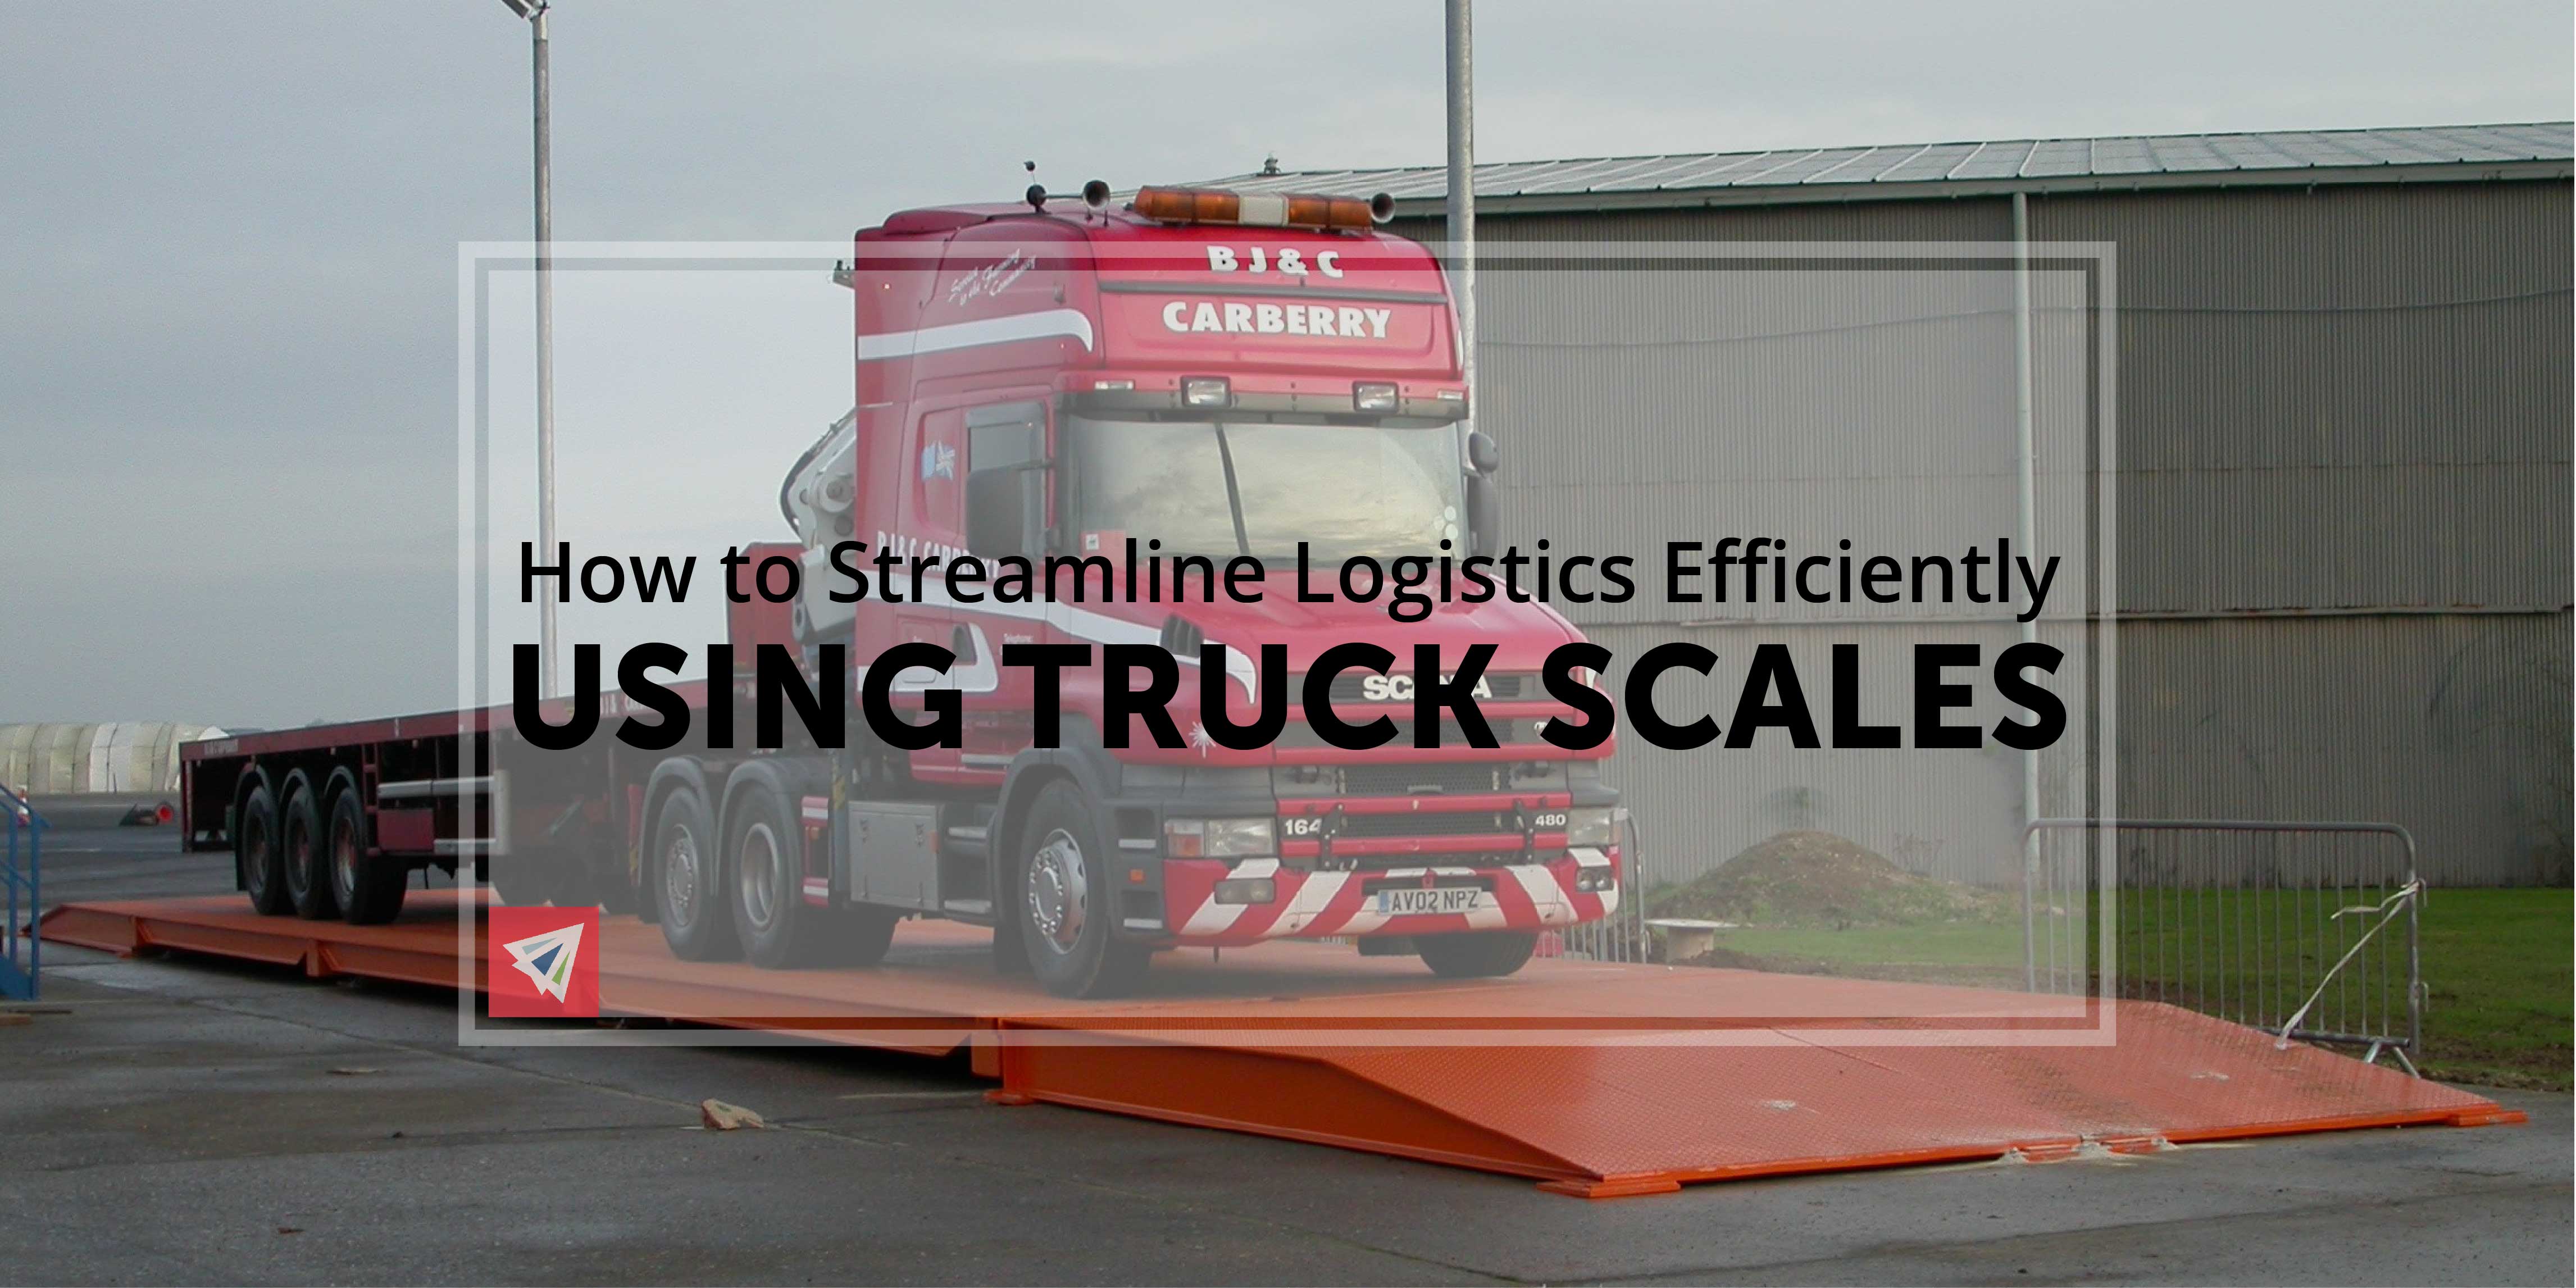 How to Streamline Logistics Efficiently Using Truck Scales